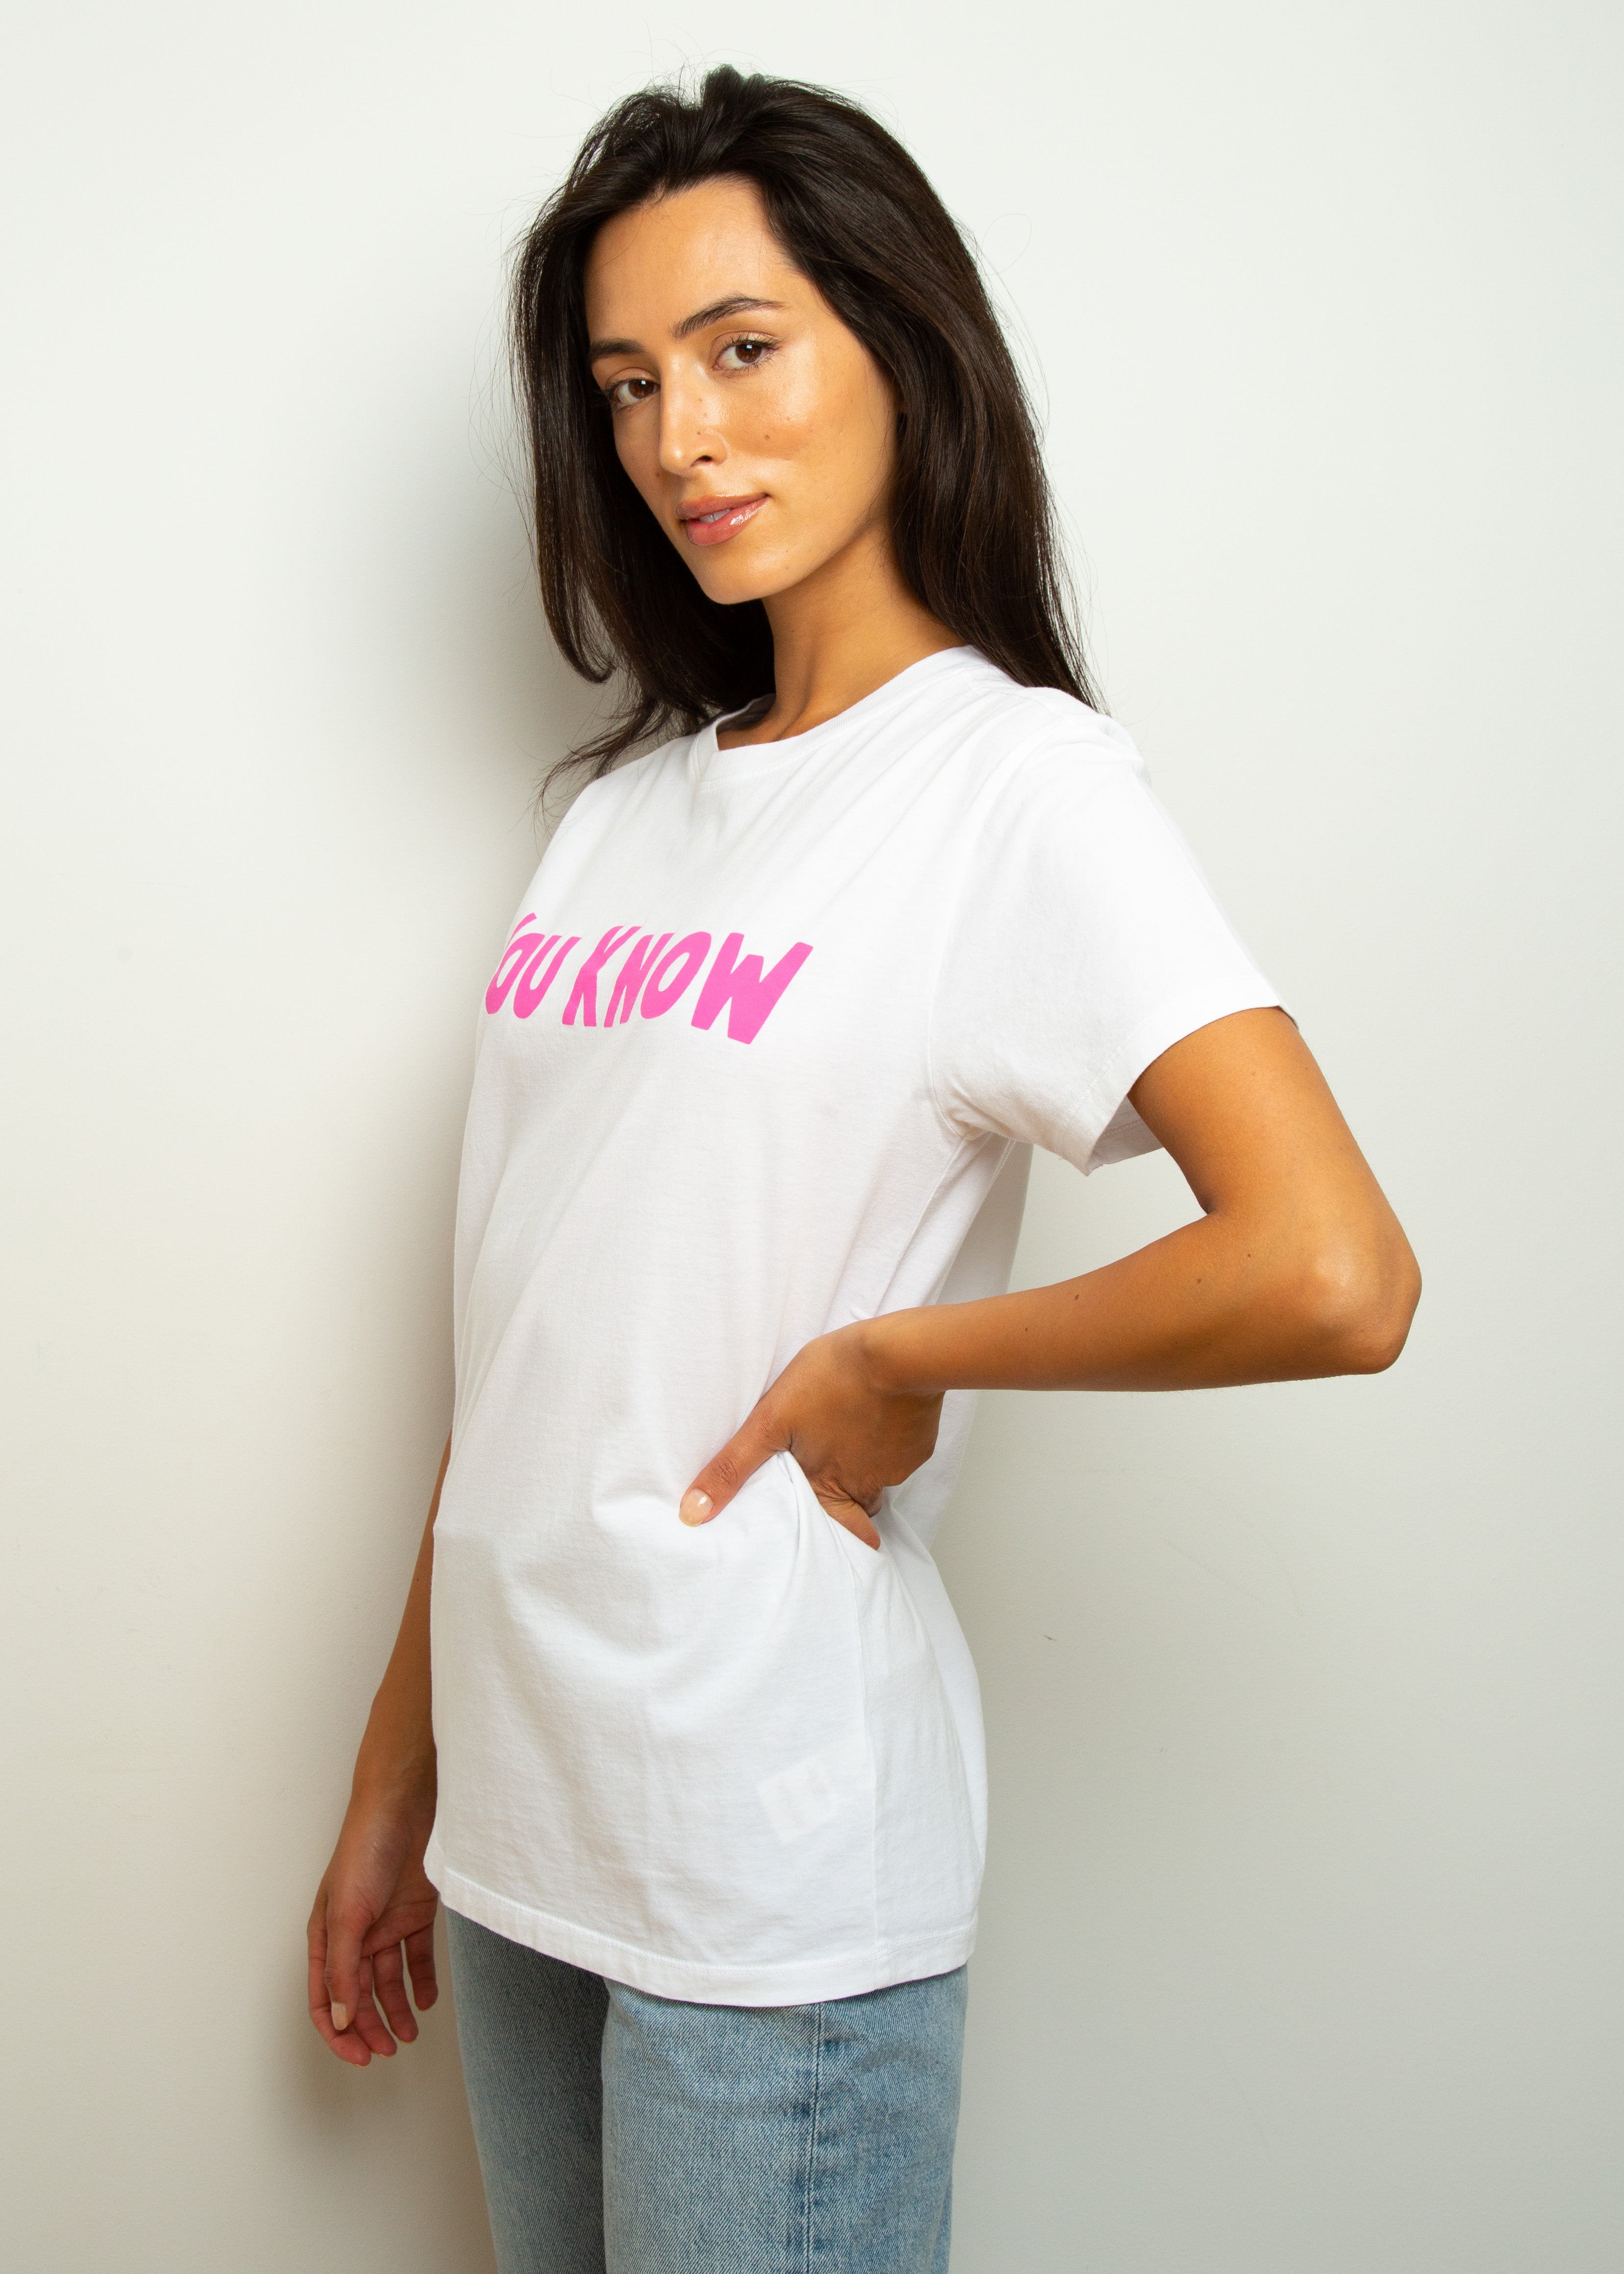 BF You Know Tee in White, Pink